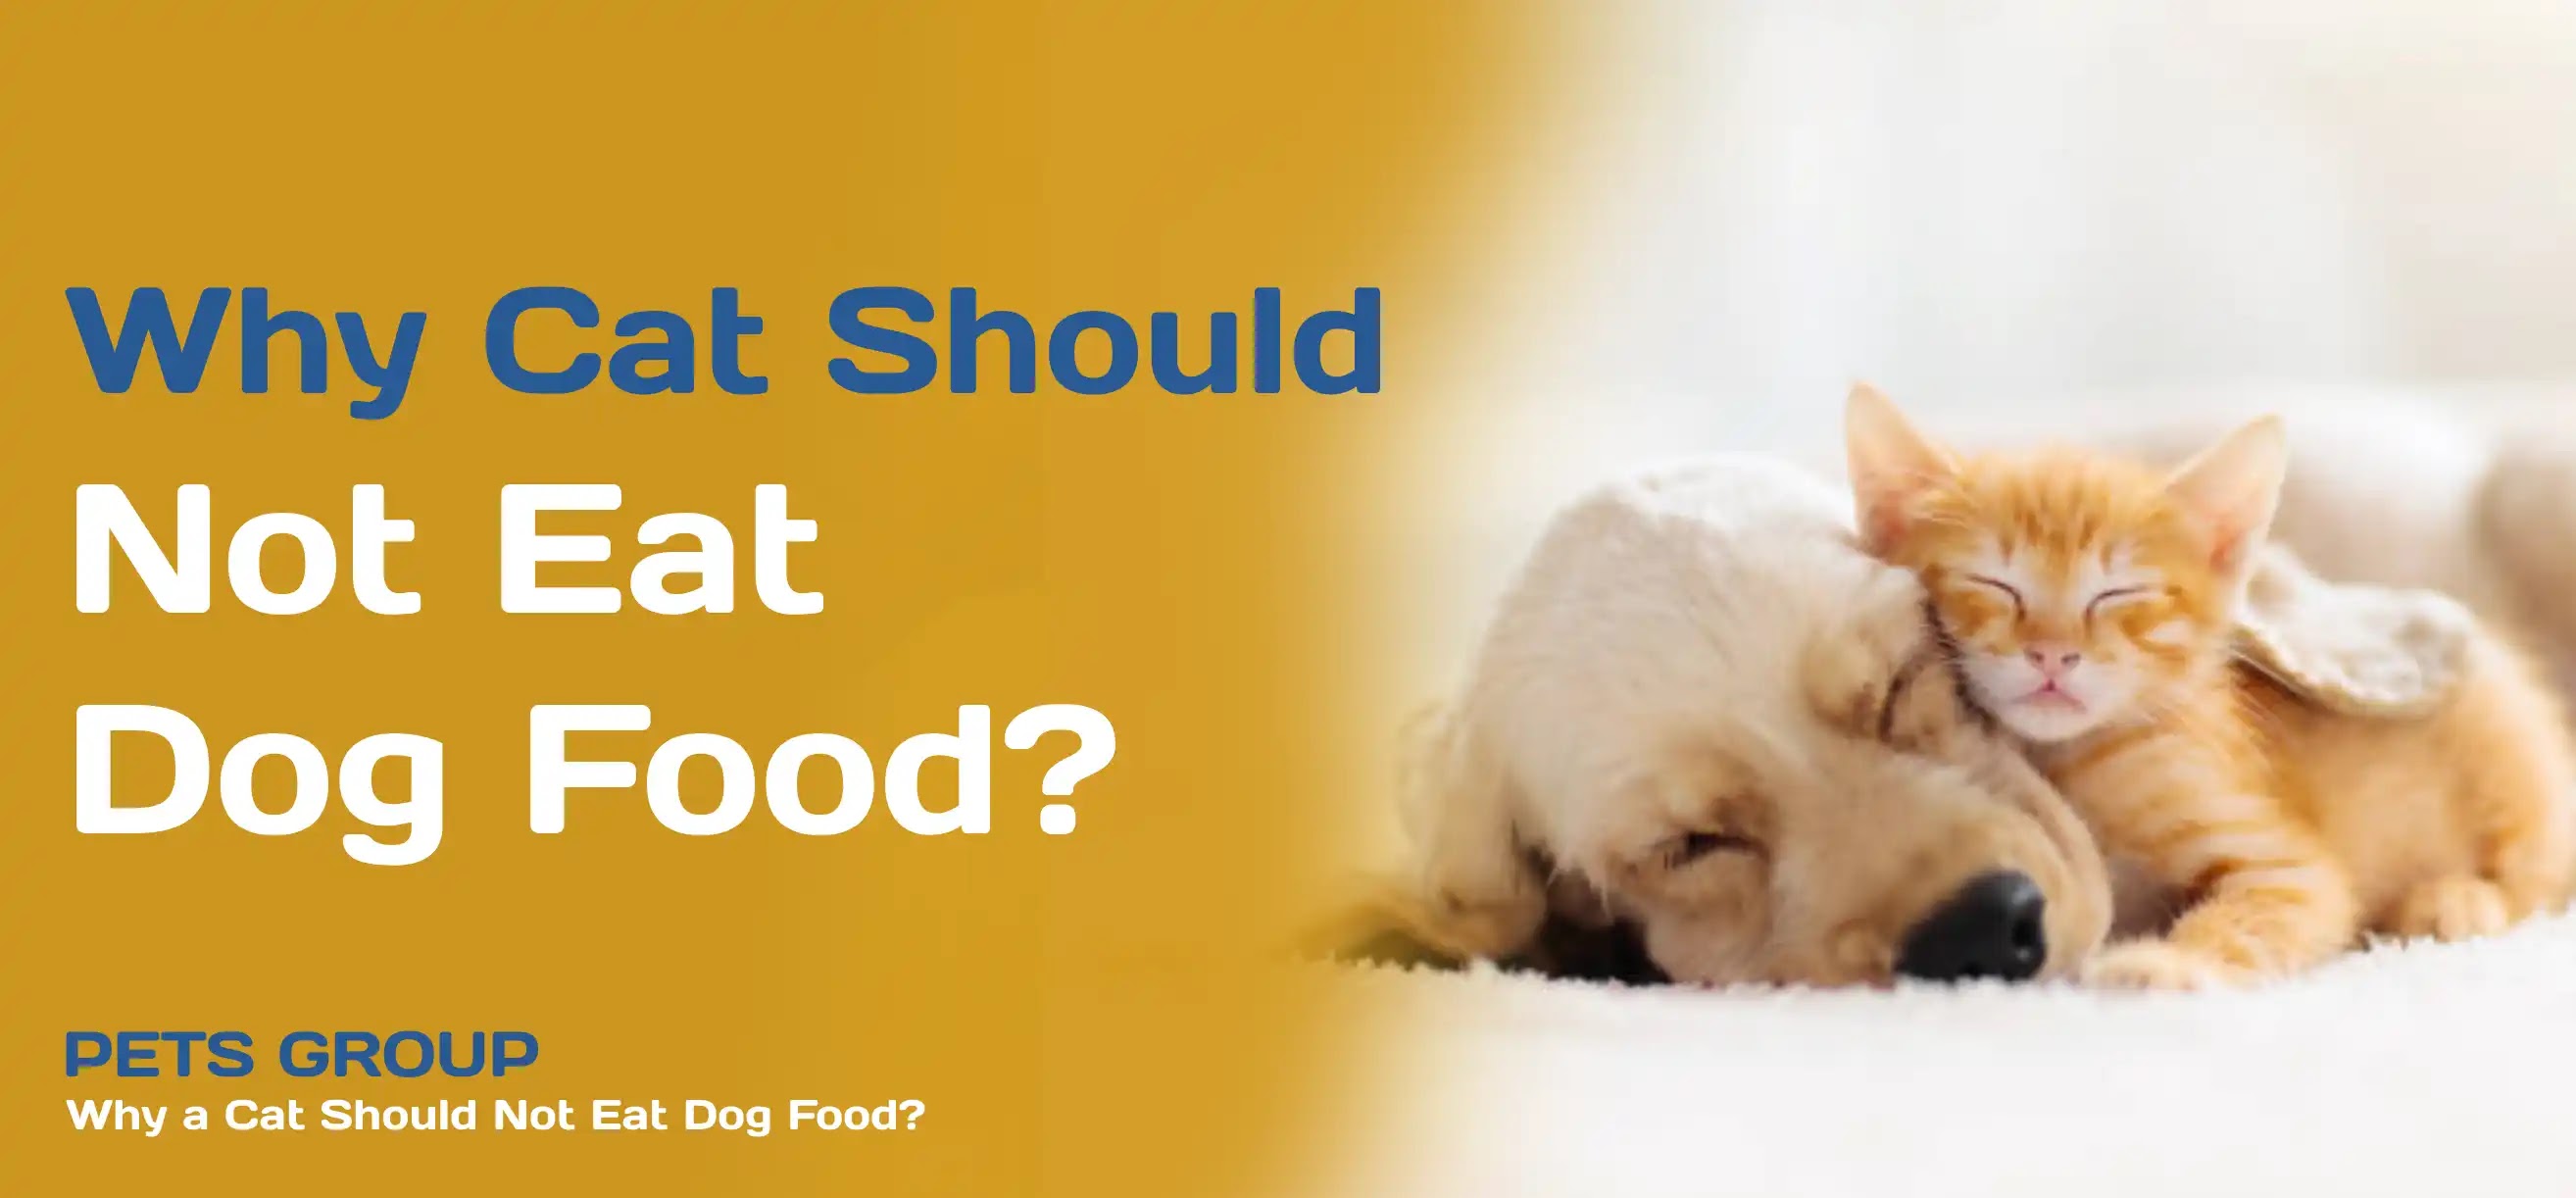 Why a Cat Should Not Eat Dog Food?